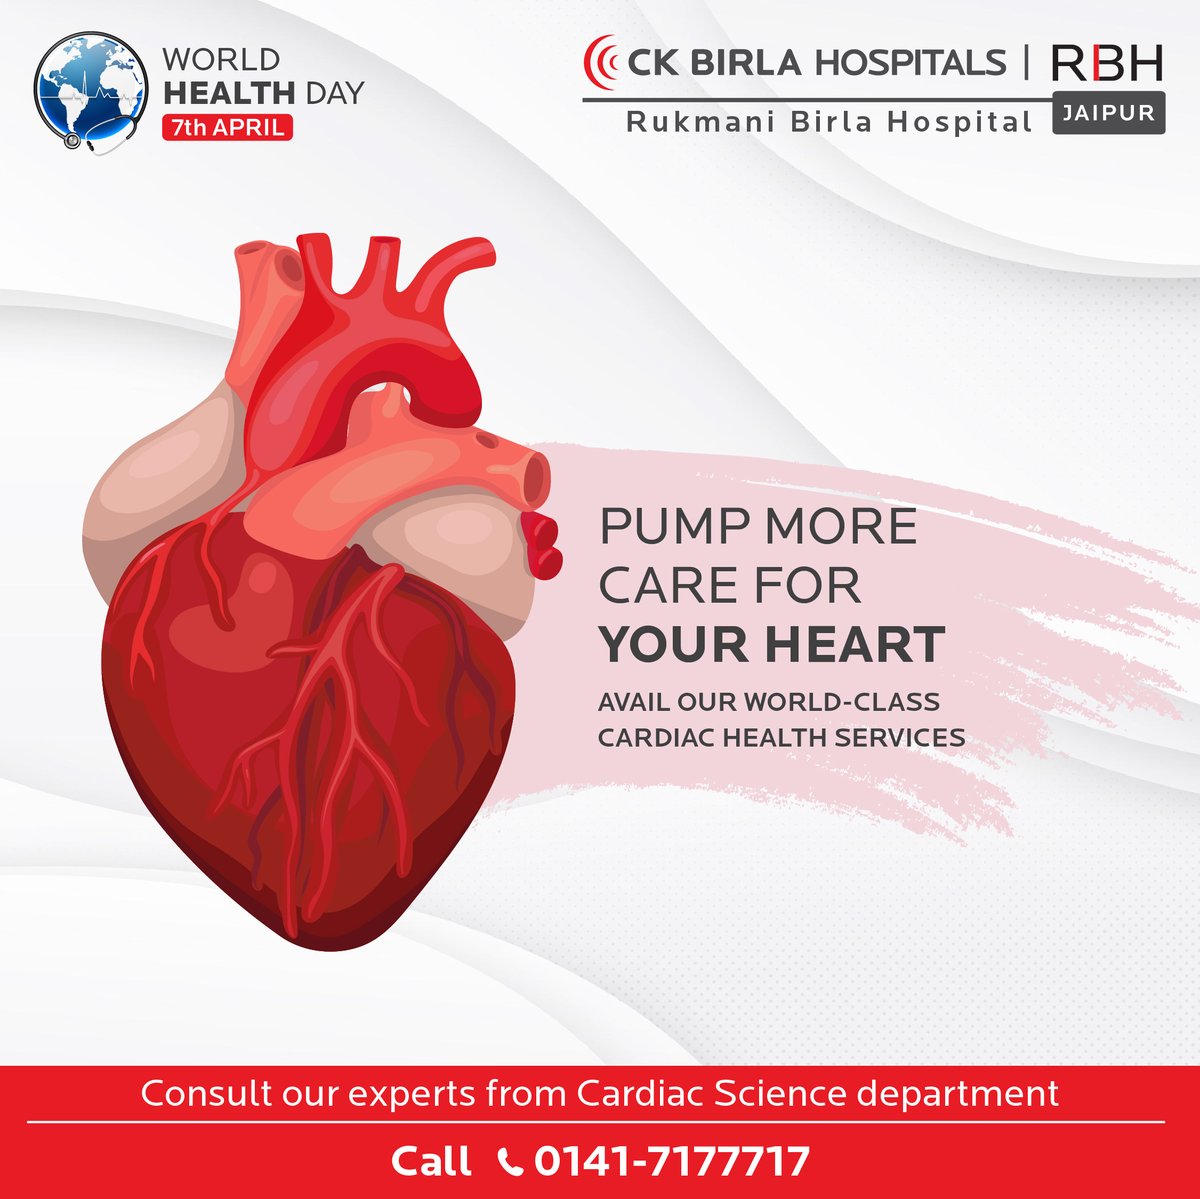 Take proper care of your heart health to lead a healthy life. Undergo regular check-ups to assess the condition of your heart. 

#HeartHealth#CardiacScience#CholesterolLevel#HeartAttack#BloodFlow #CloggedArteries #RBHJaipur